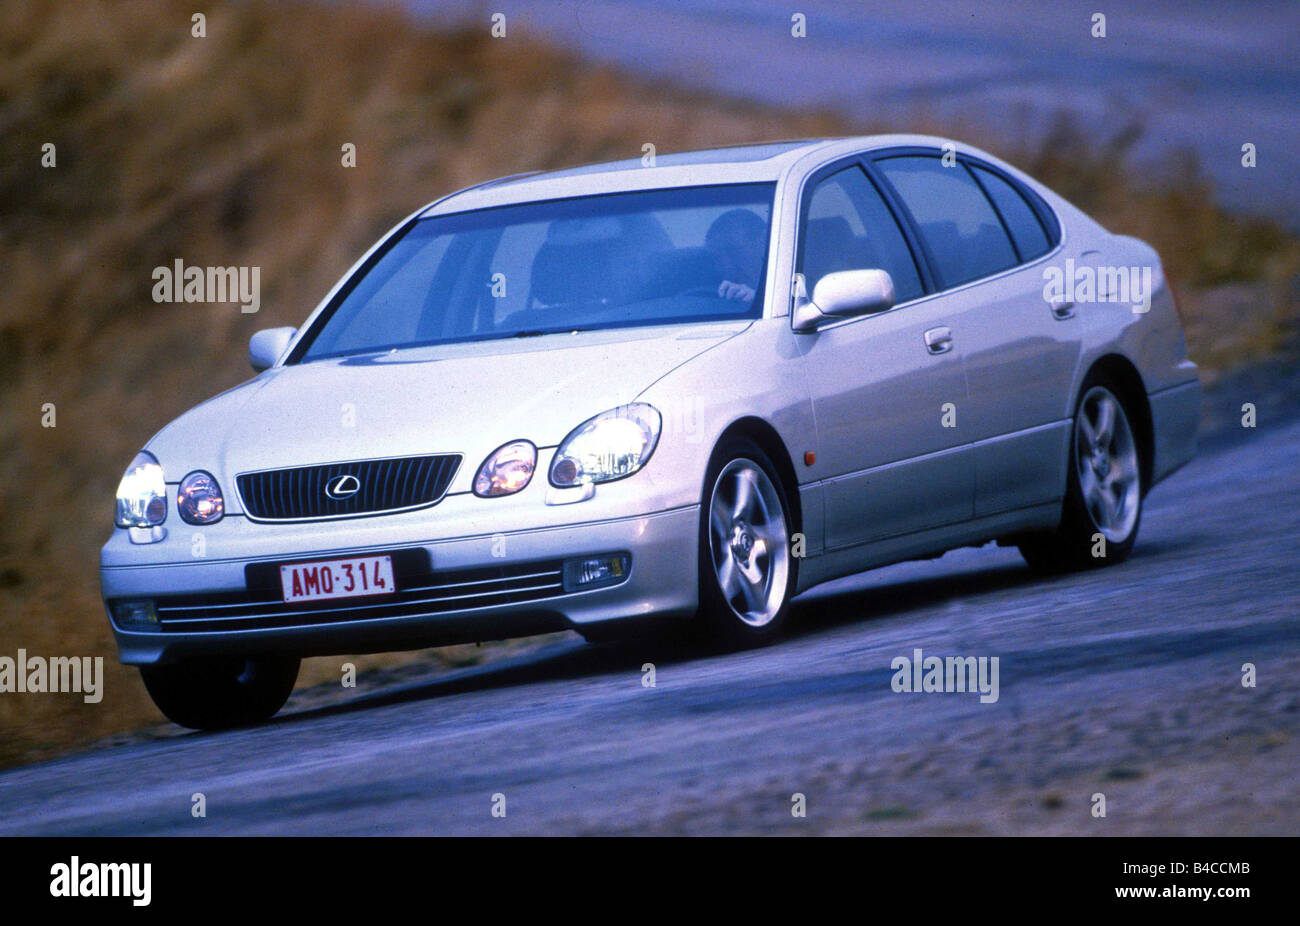 Car, Lexus GS 430, Limousine, upper middle-sized , model year 2000-, silver, driving, country road, diagonal from the front Stock Photo